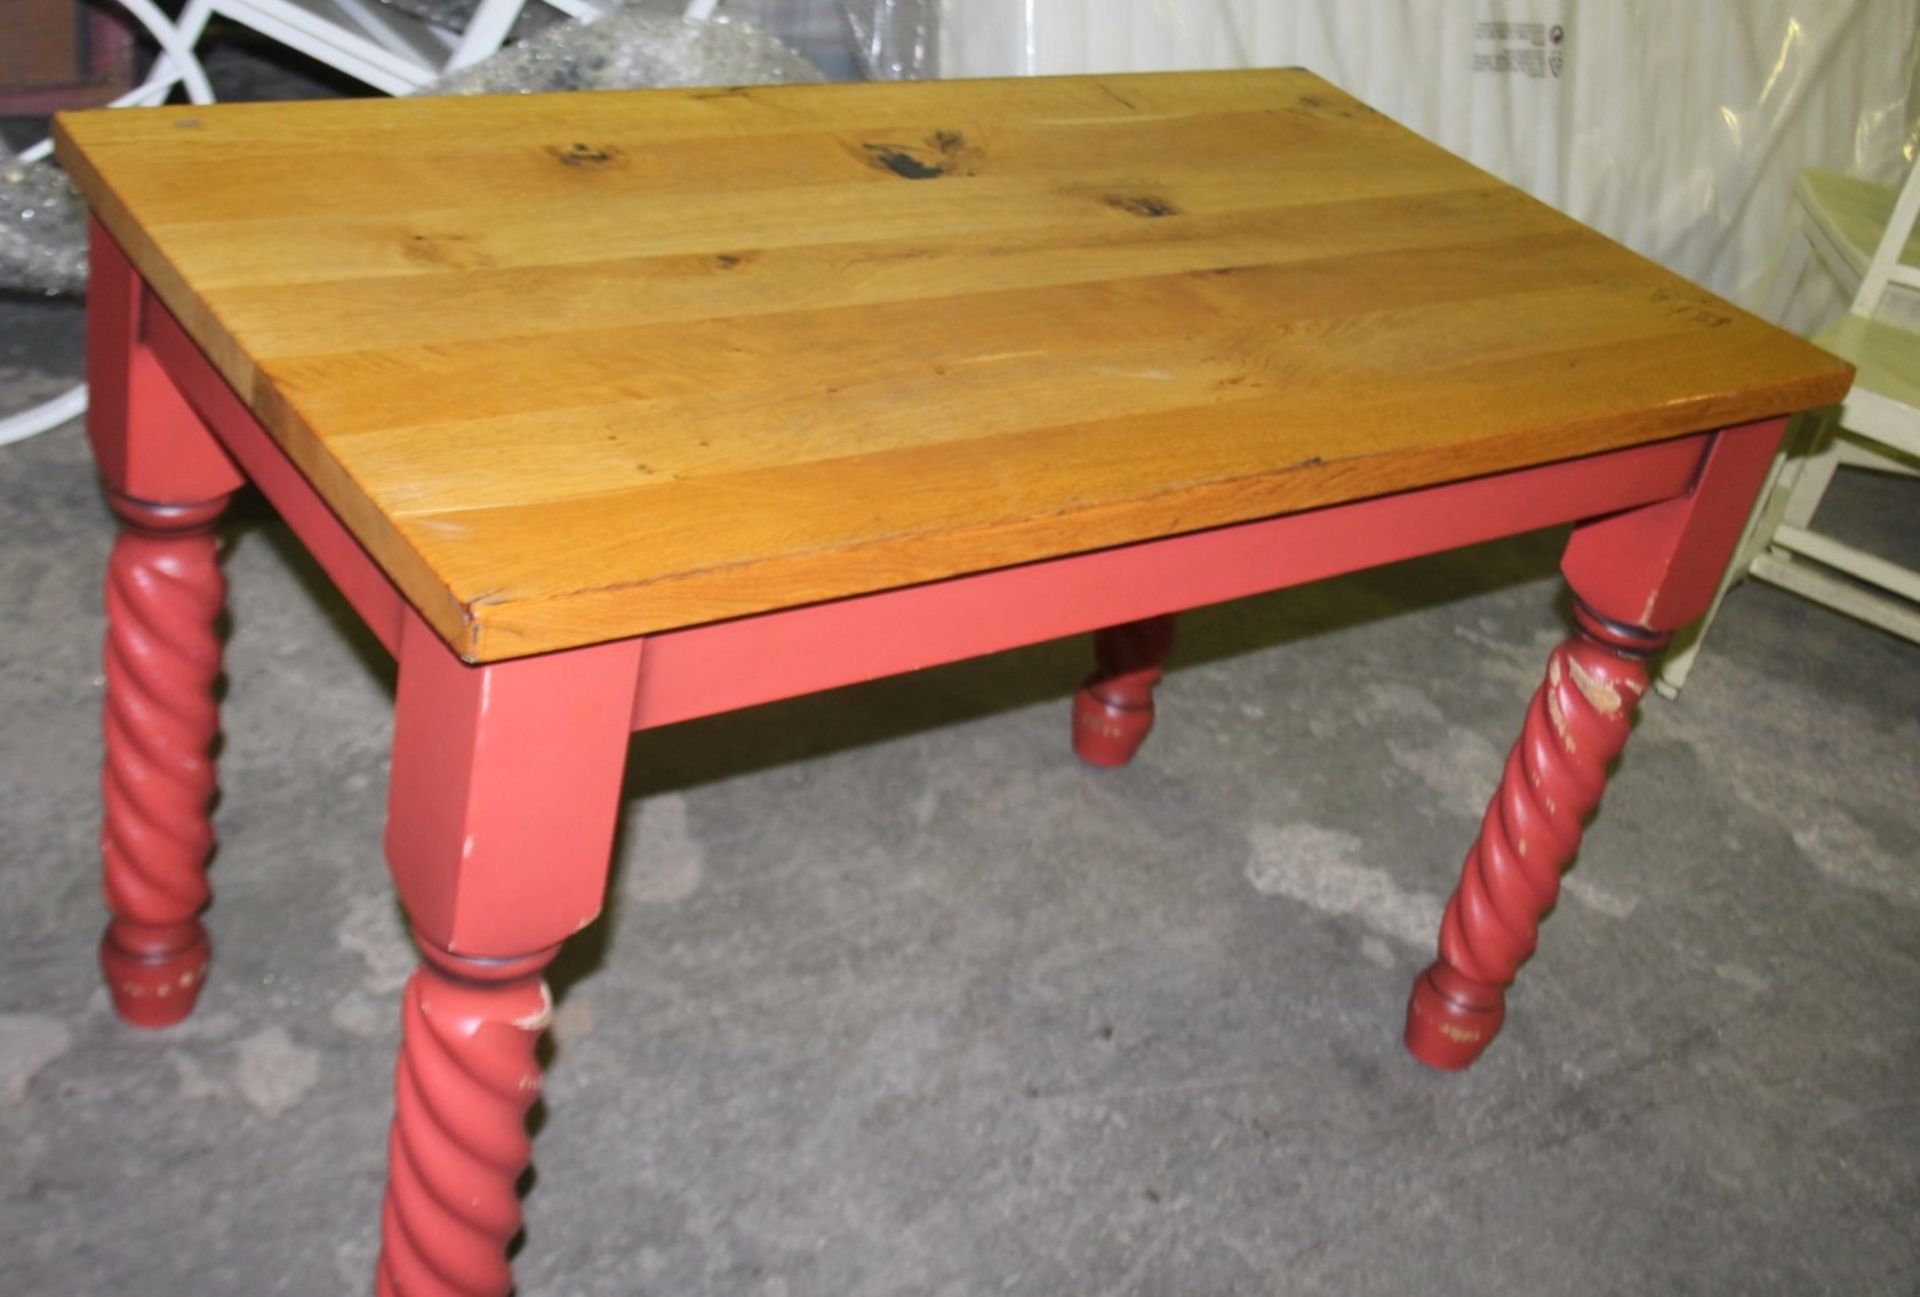 1 x Solid Wood Farmhouse Dining Table in Red With 4 x Chairs - Features A Solid Oak Table Top - Image 3 of 6